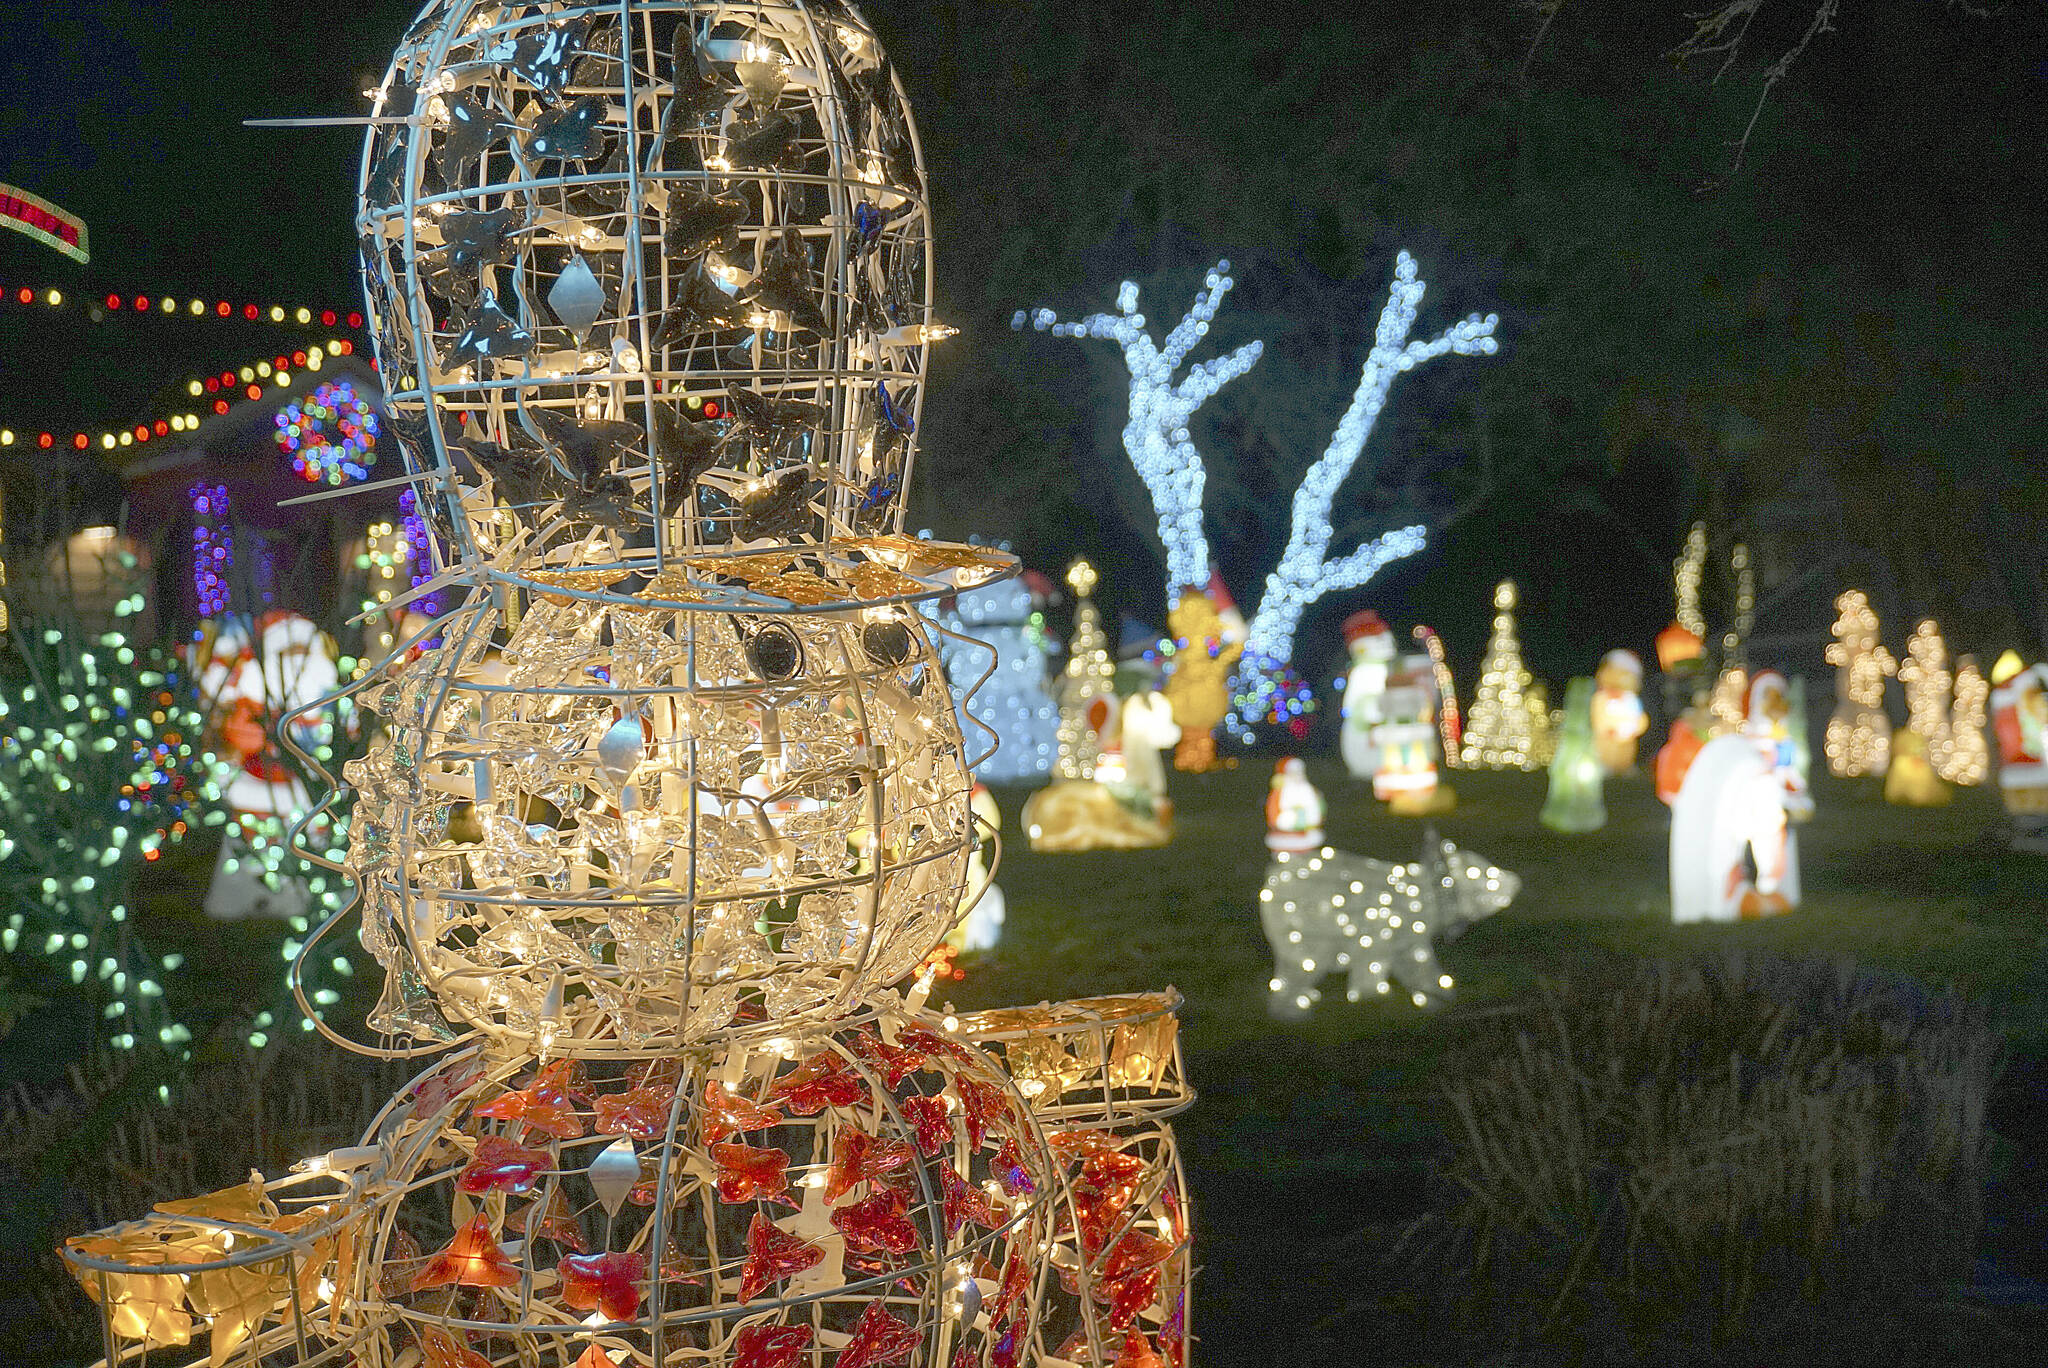 More than 100 figurines and roughly 40,000 total lights adorn the yard outside Wiley Jones Irwin’s home. Luciano Marano | Bainbridge Island Review